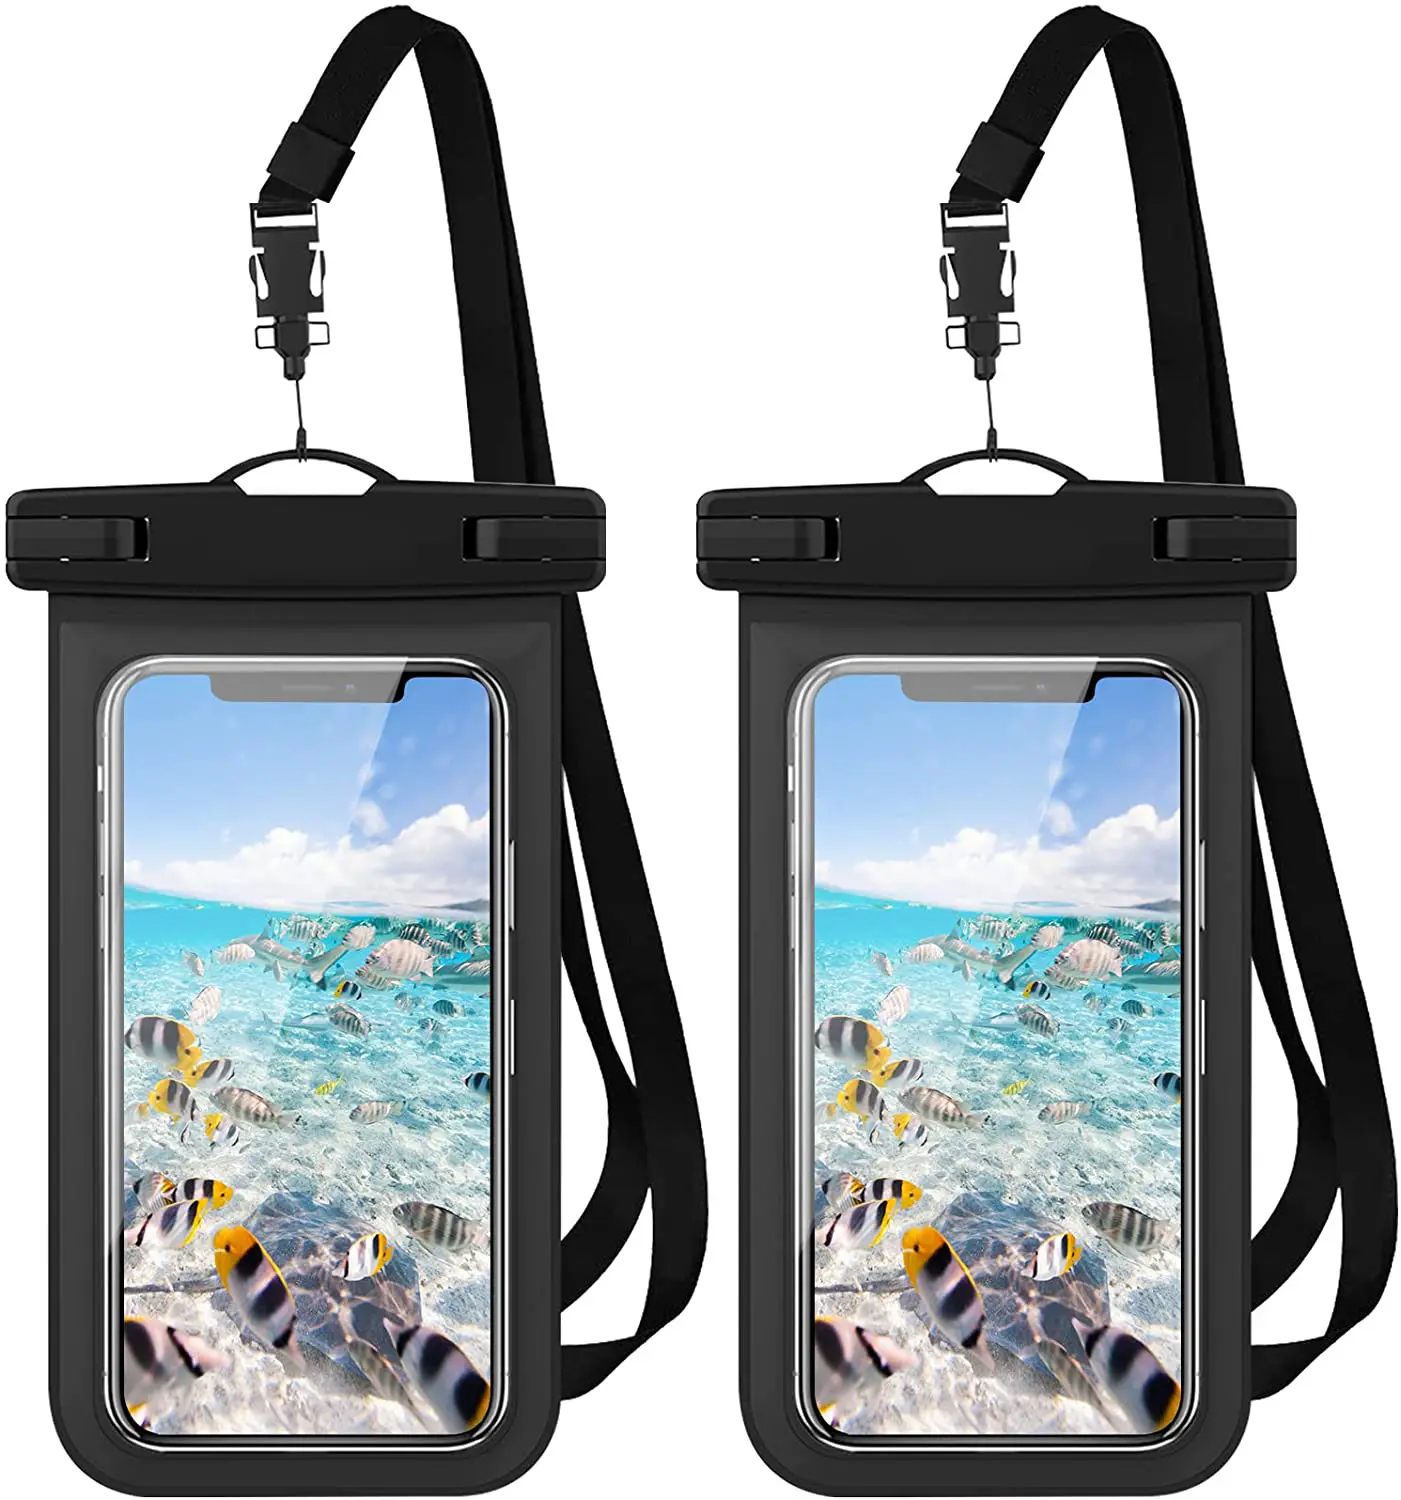 Waterproof Phone Pouch Drift Diving Swimming Bag Underwater Dry Bag Case Cover For iPhone Water Sports Skiing Waterproof Bag